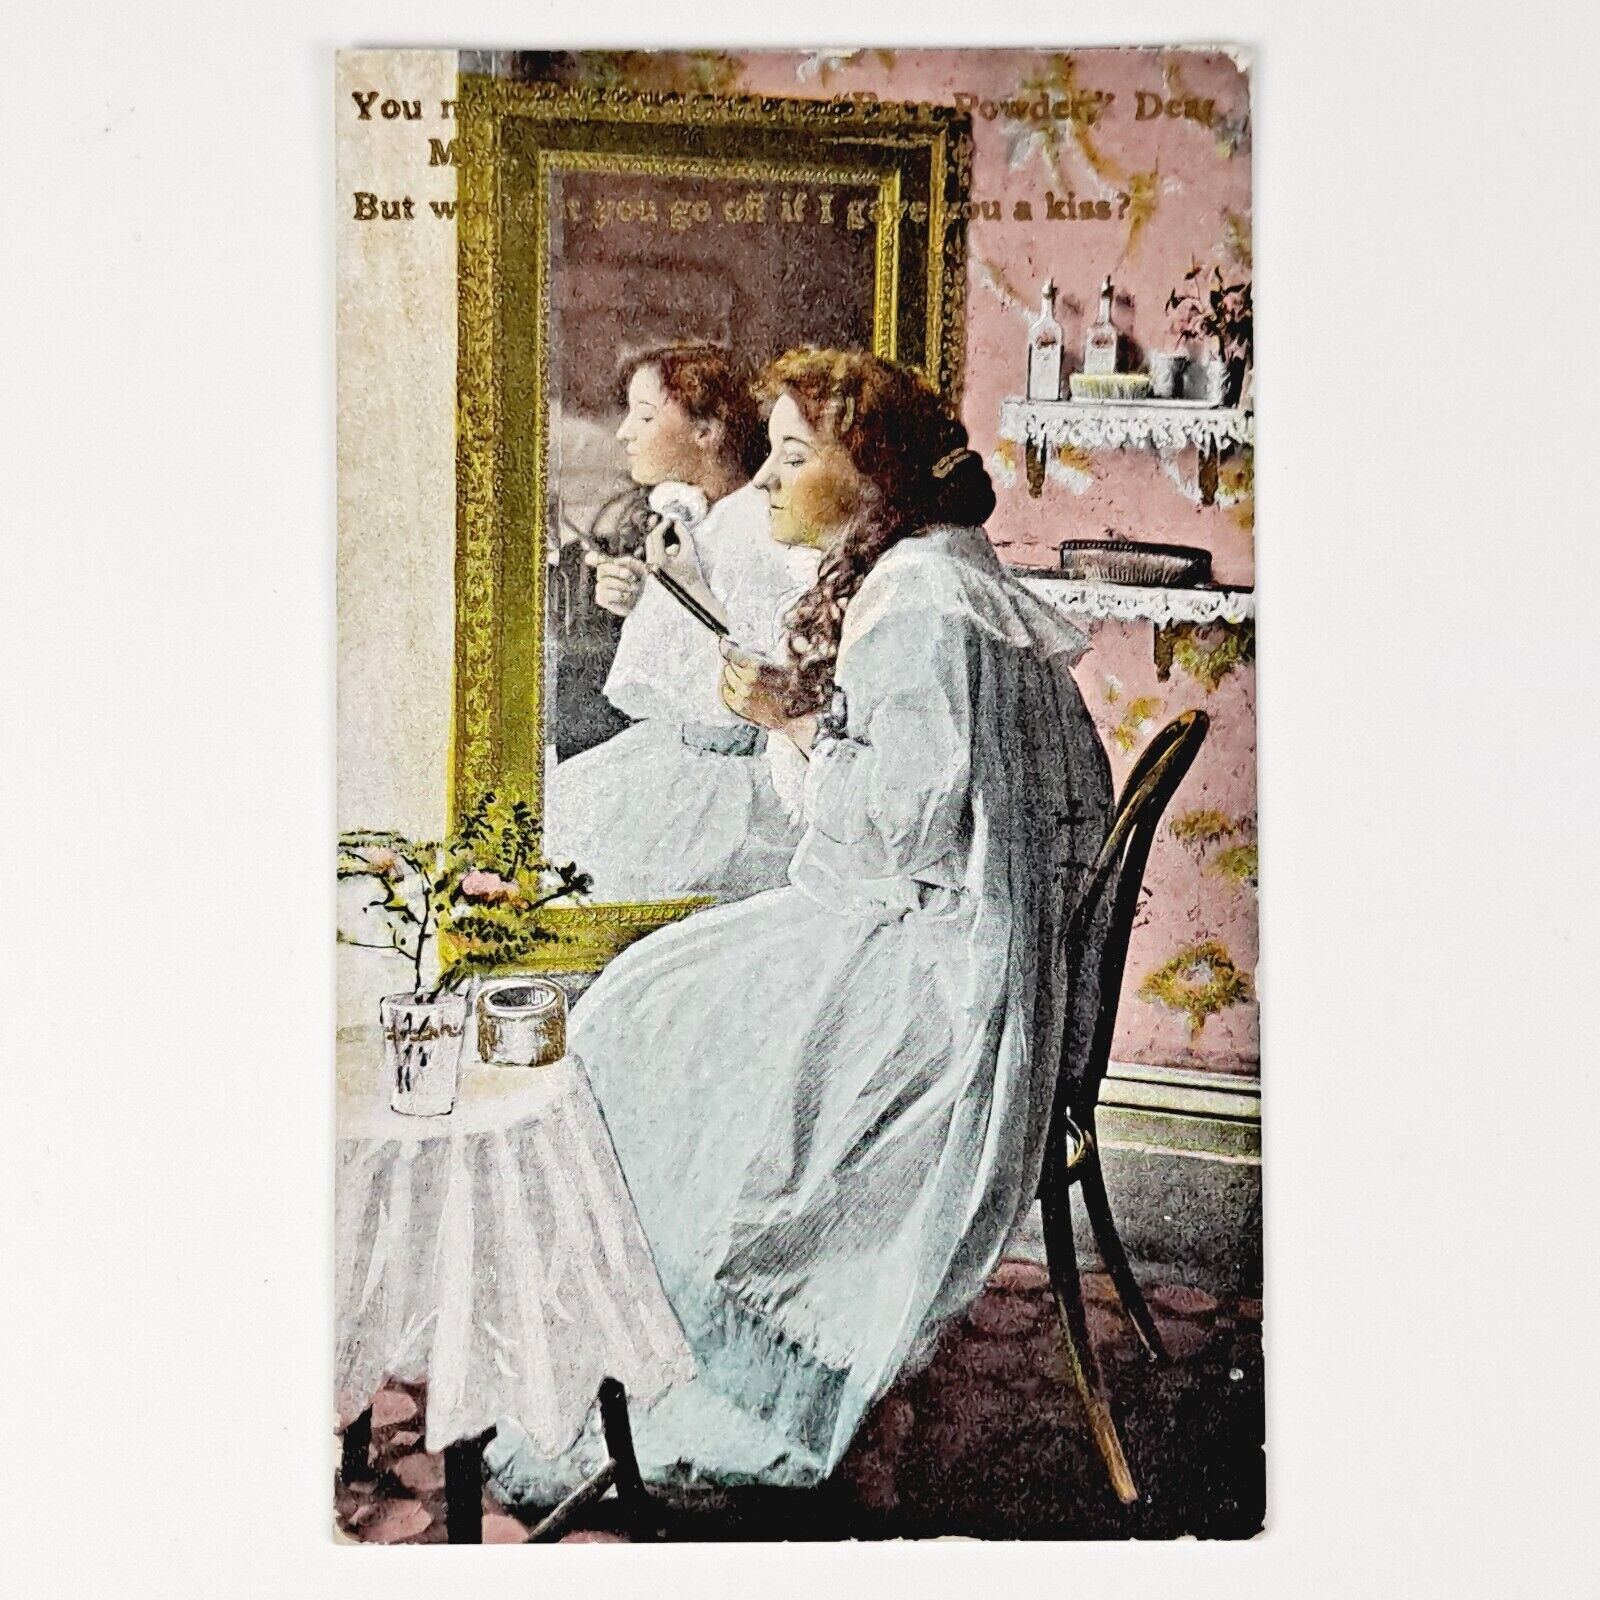 ANTIQUE 1910 POST CARD LOVE & ROMANCE PREPARING FOR COURTSHIP POSTCARD - POSTED